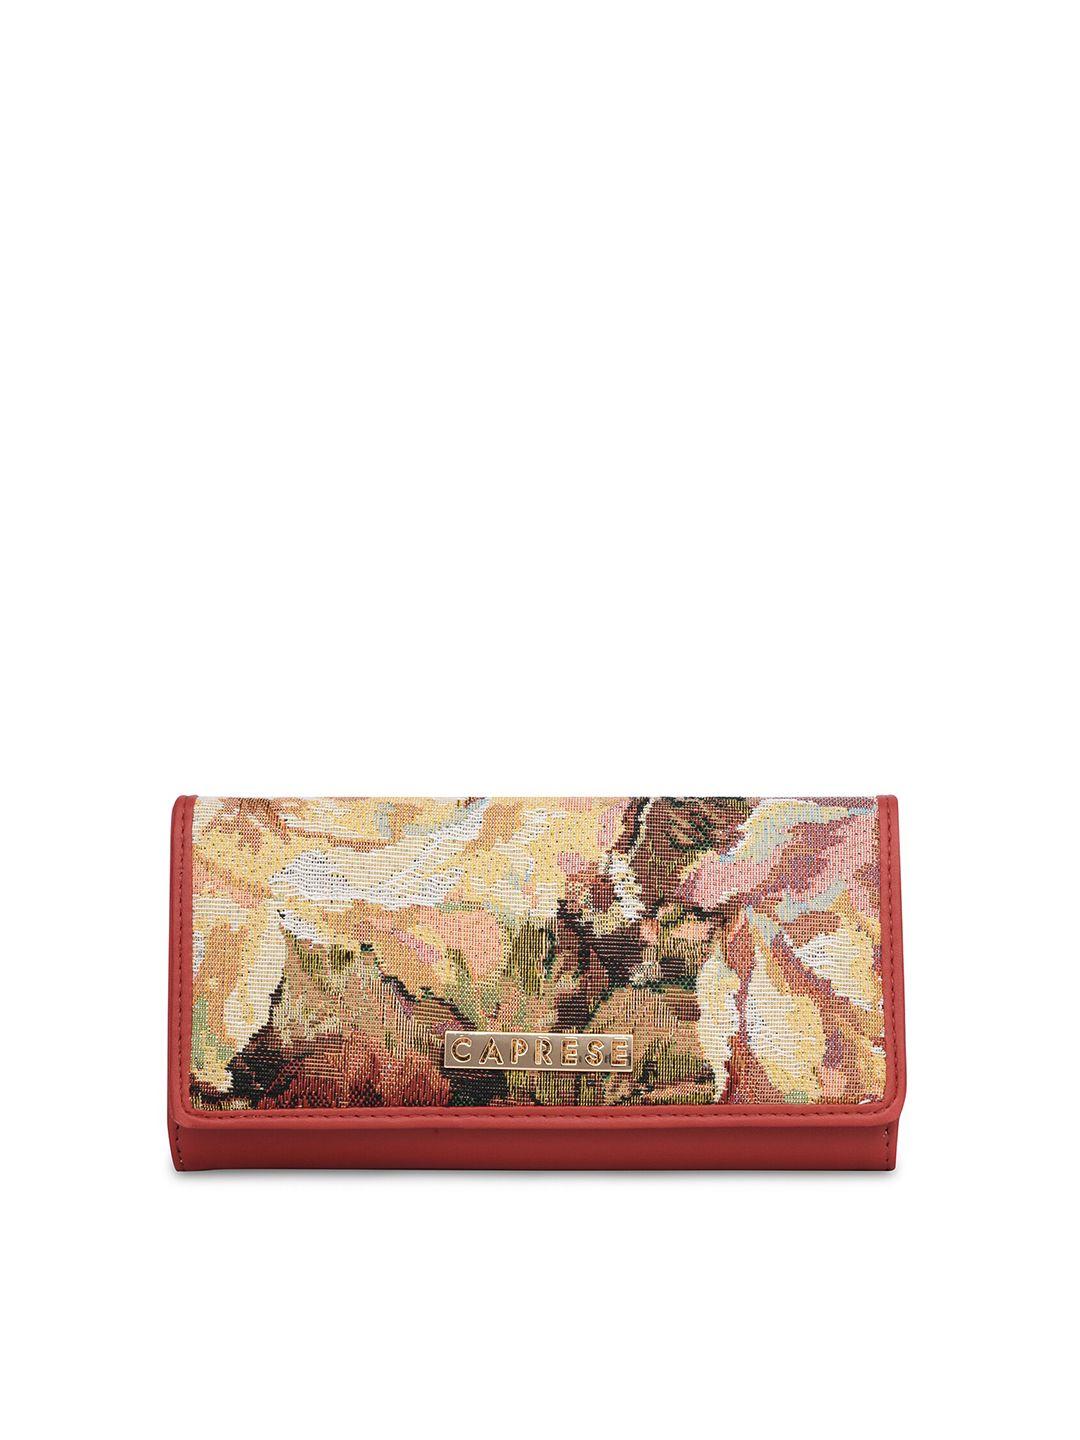 caprese women abstract printed leather envelope